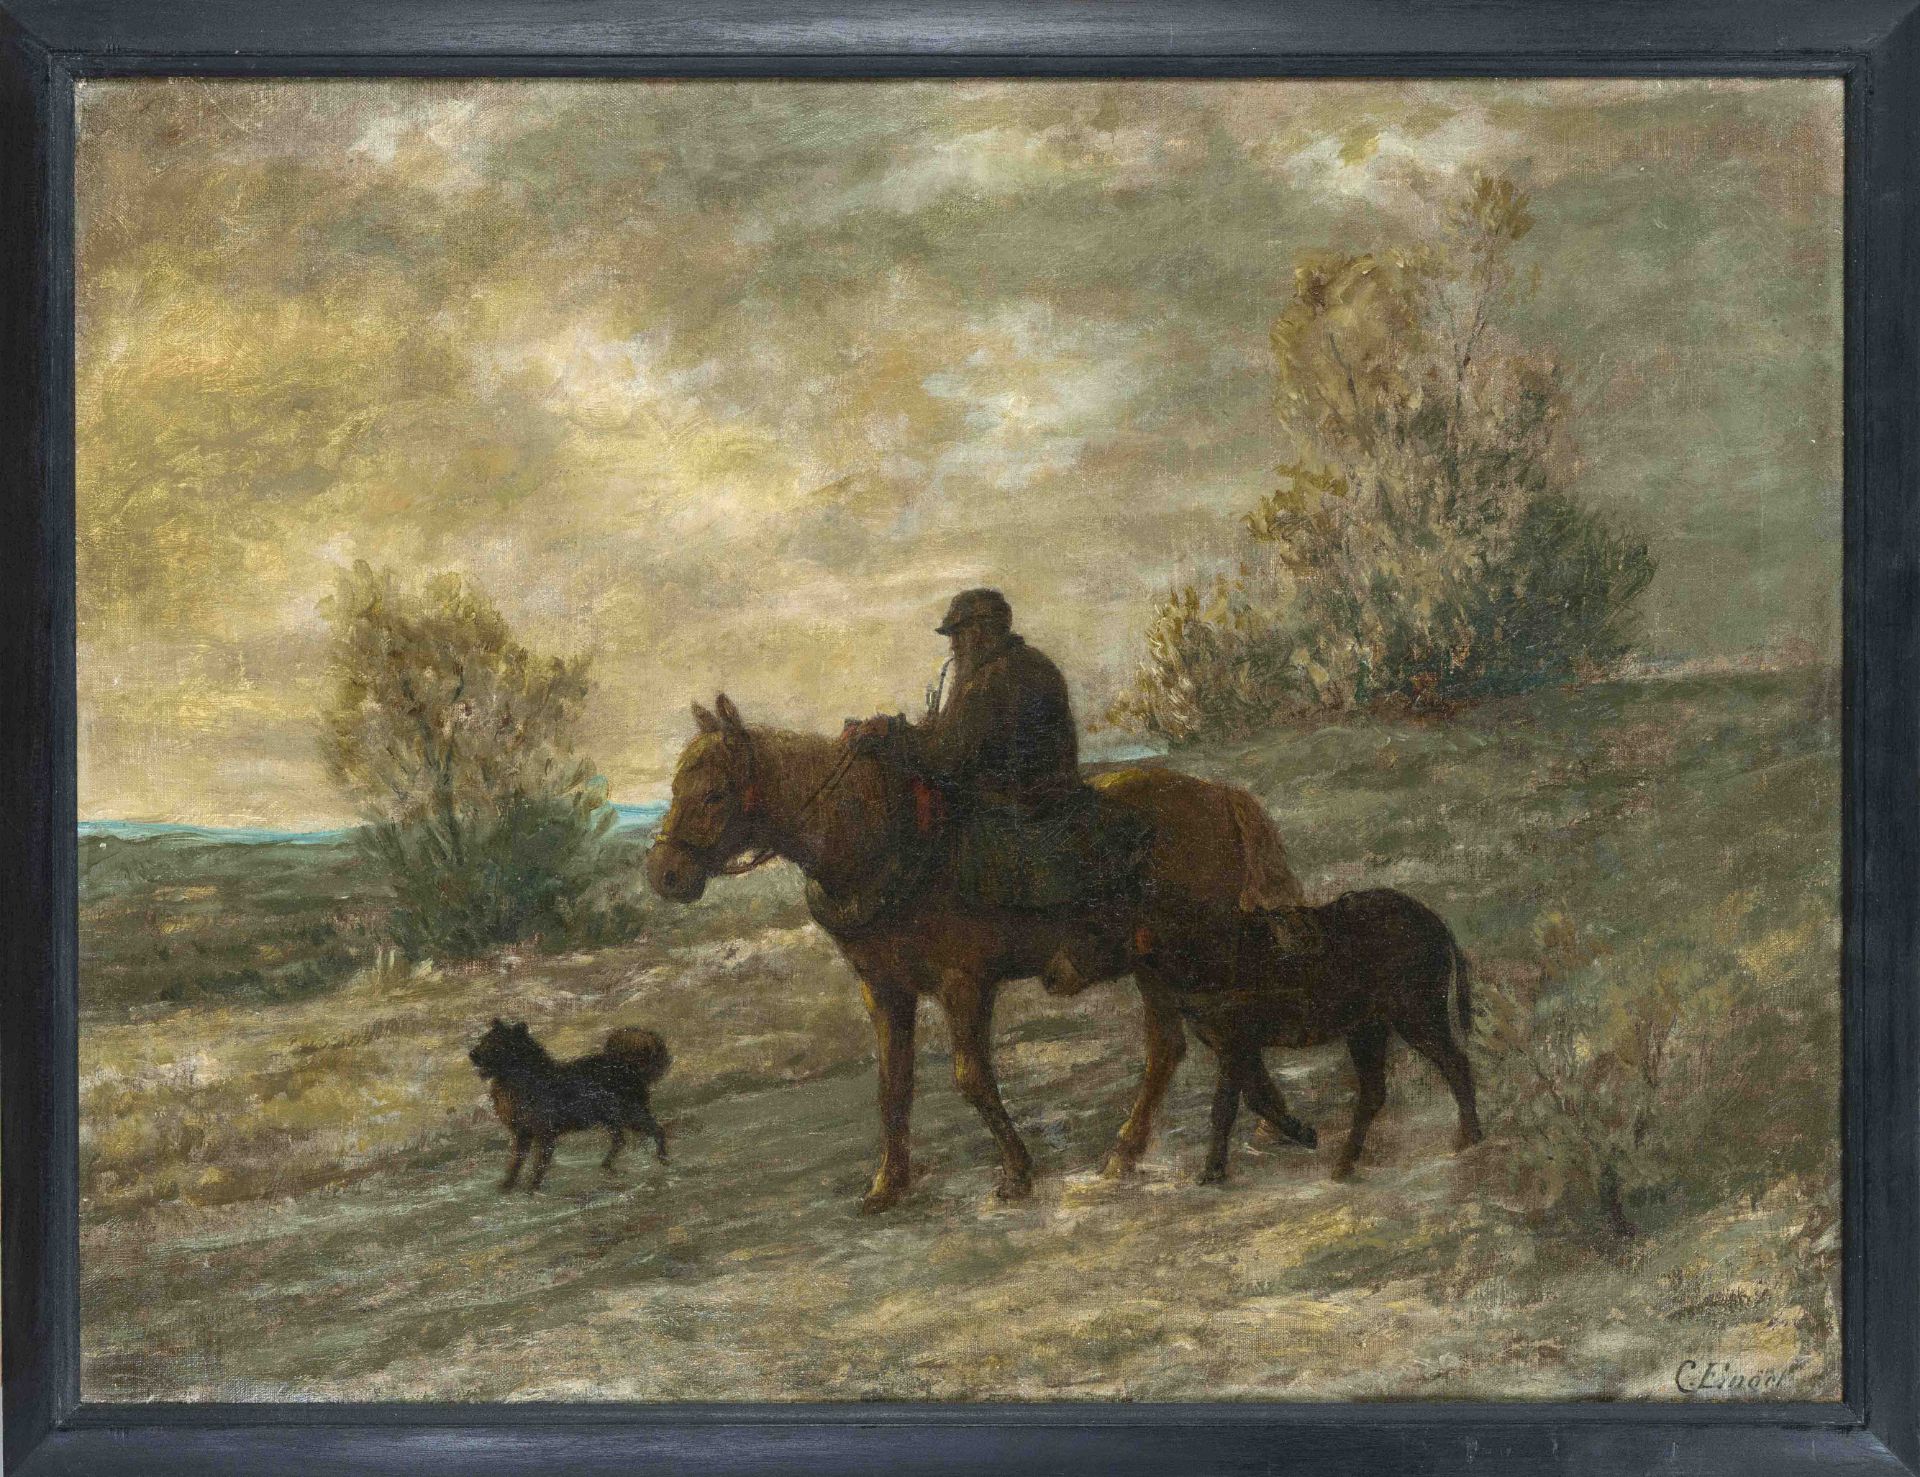 Carl Engel, 19th century, Landscape in the evening with a farmer returning home, accompanied by a